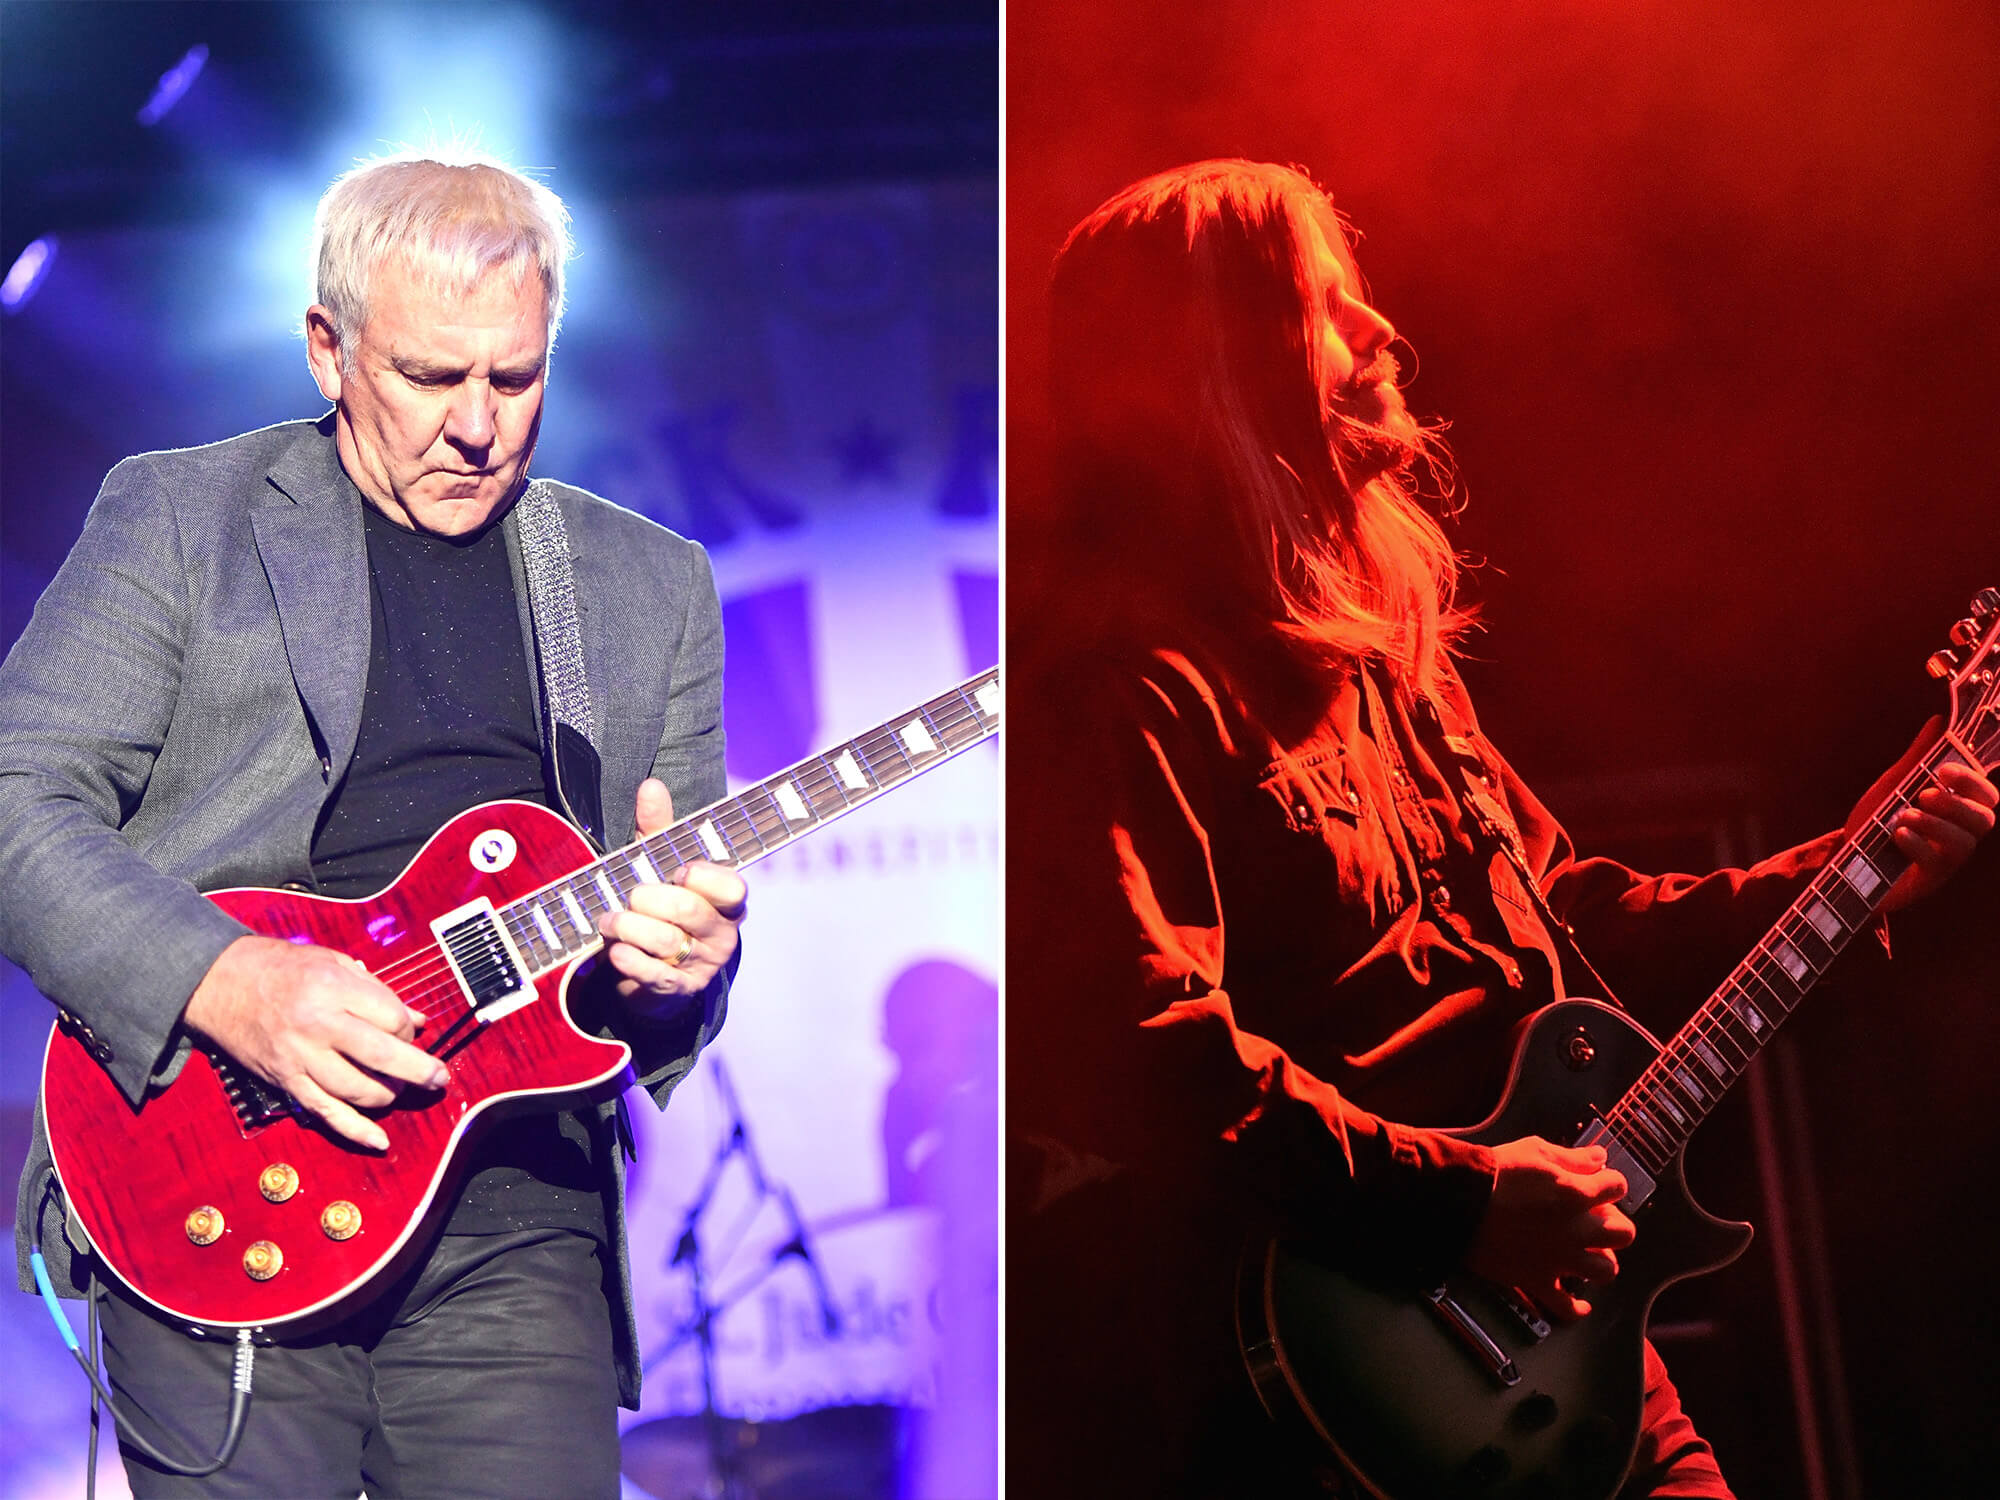 Alex Lifeson (left) looking down and playing a red Les Paul.He wears a grey suit jacket and plain black top. Adam Jones of Tool (right) with a grey Les Paul in hand. He stands under red lights and has long hair.